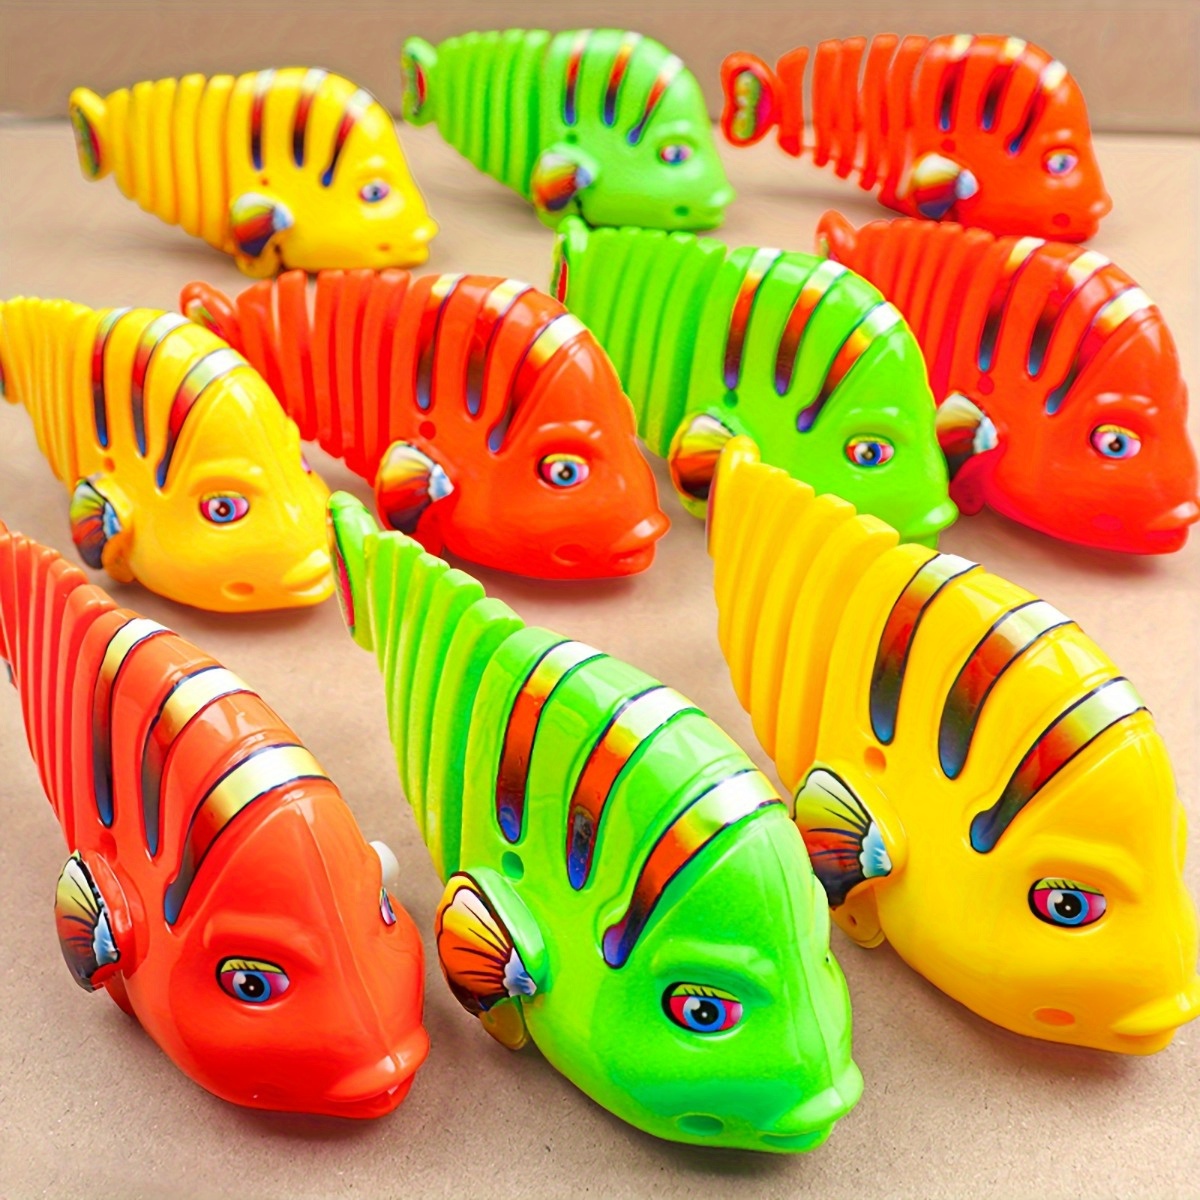 1pc Plastic Fishing Toy, Funny Cartoon Design Electric Fishing Toy For Kids